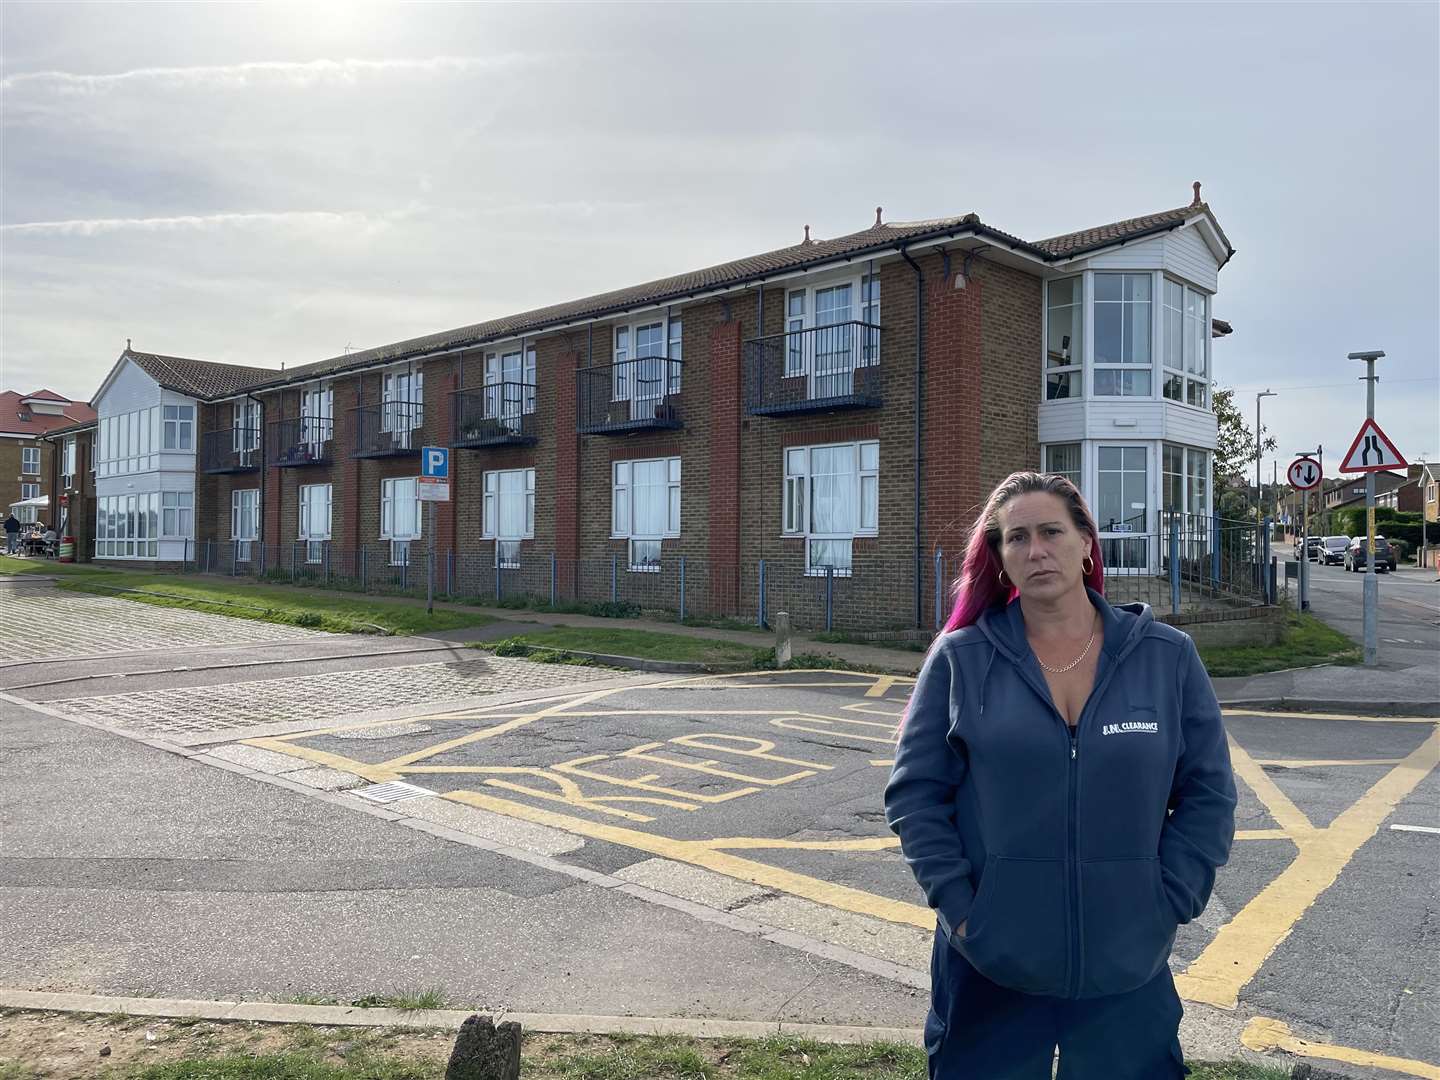 Tarnia Harrison outside the Little Oyster Residential Home on Minster seafront where her brother Terry Raymond lived before his death